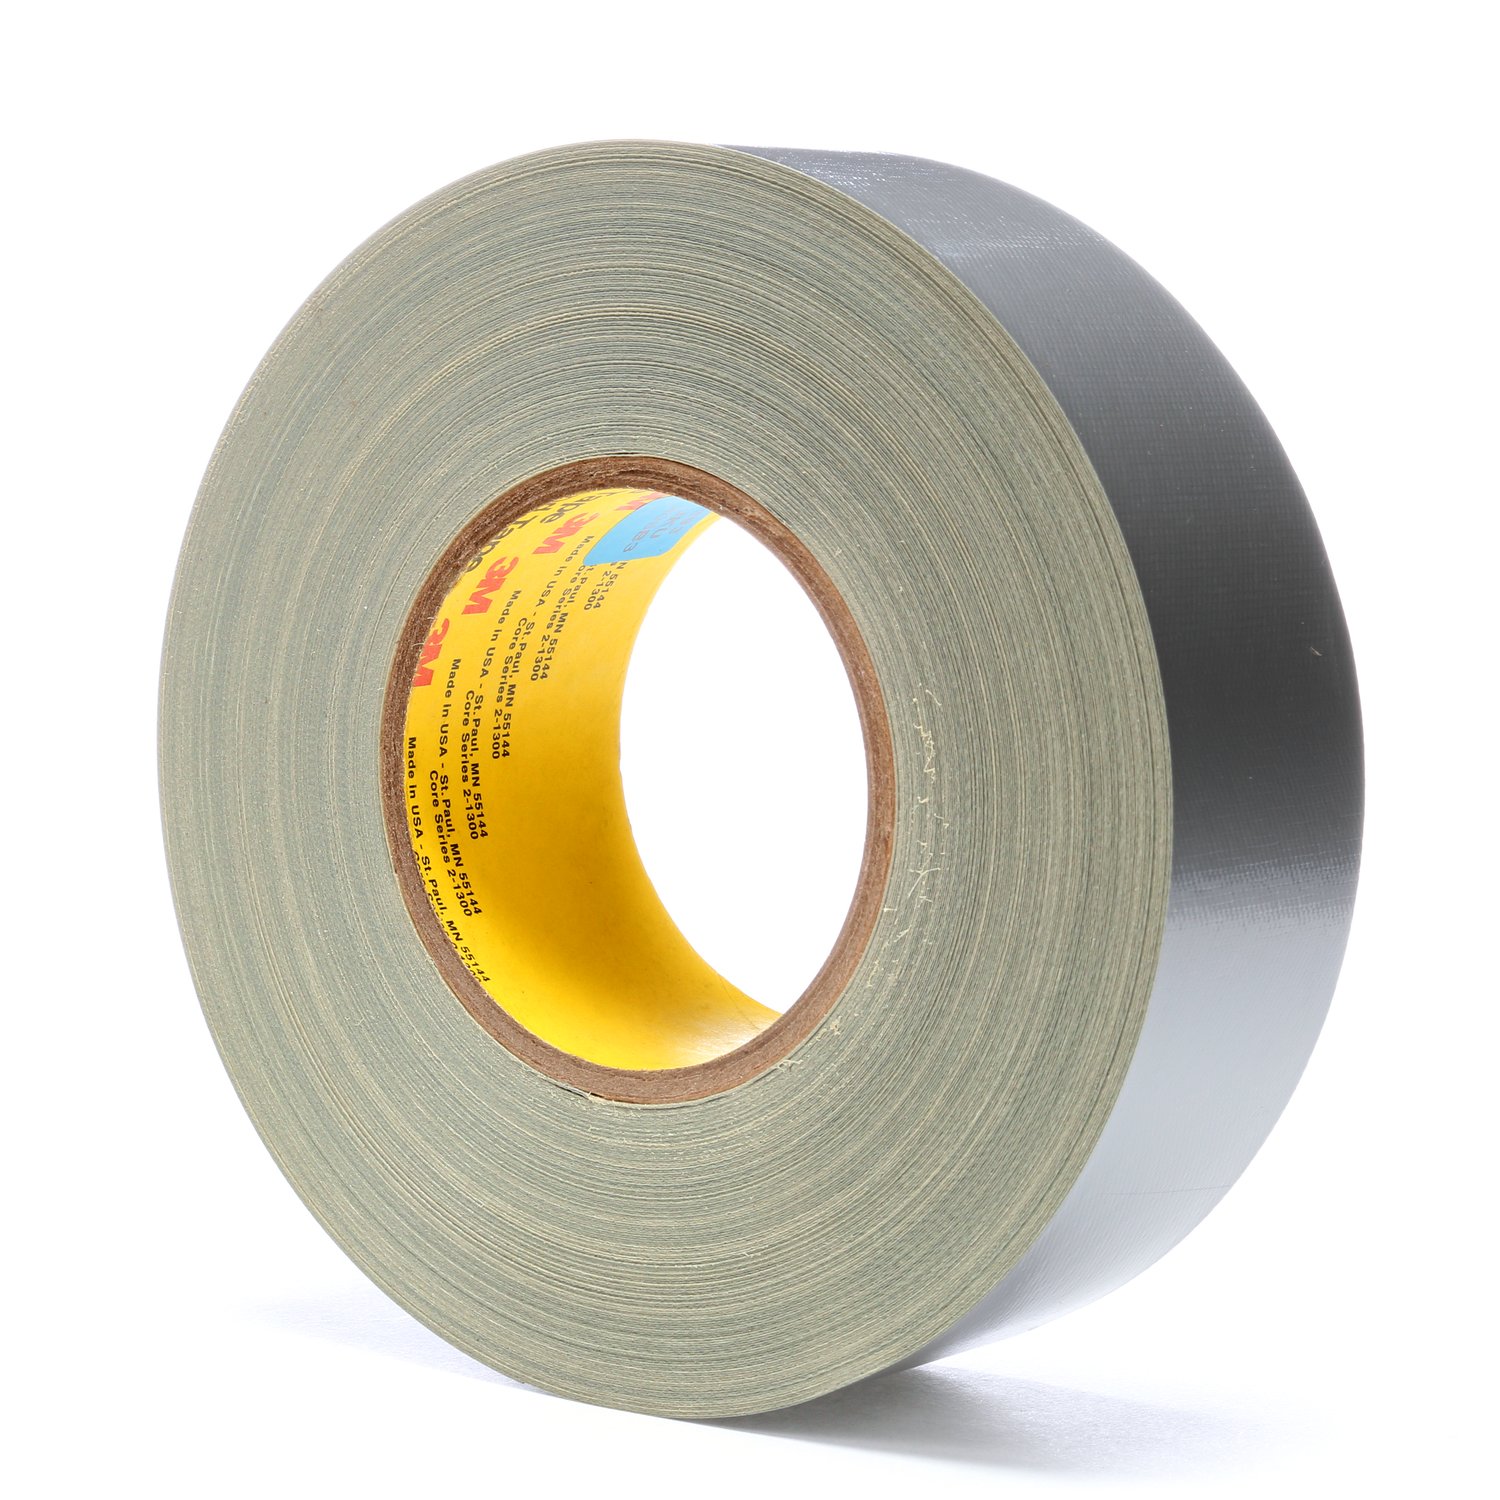 https://www.e-aircraftsupply.com/ItemImages/05/1057339E_scotch-gen-purp-cloth-duct-tape-393-silver-48mmx54-8-m-12-mil.jpg